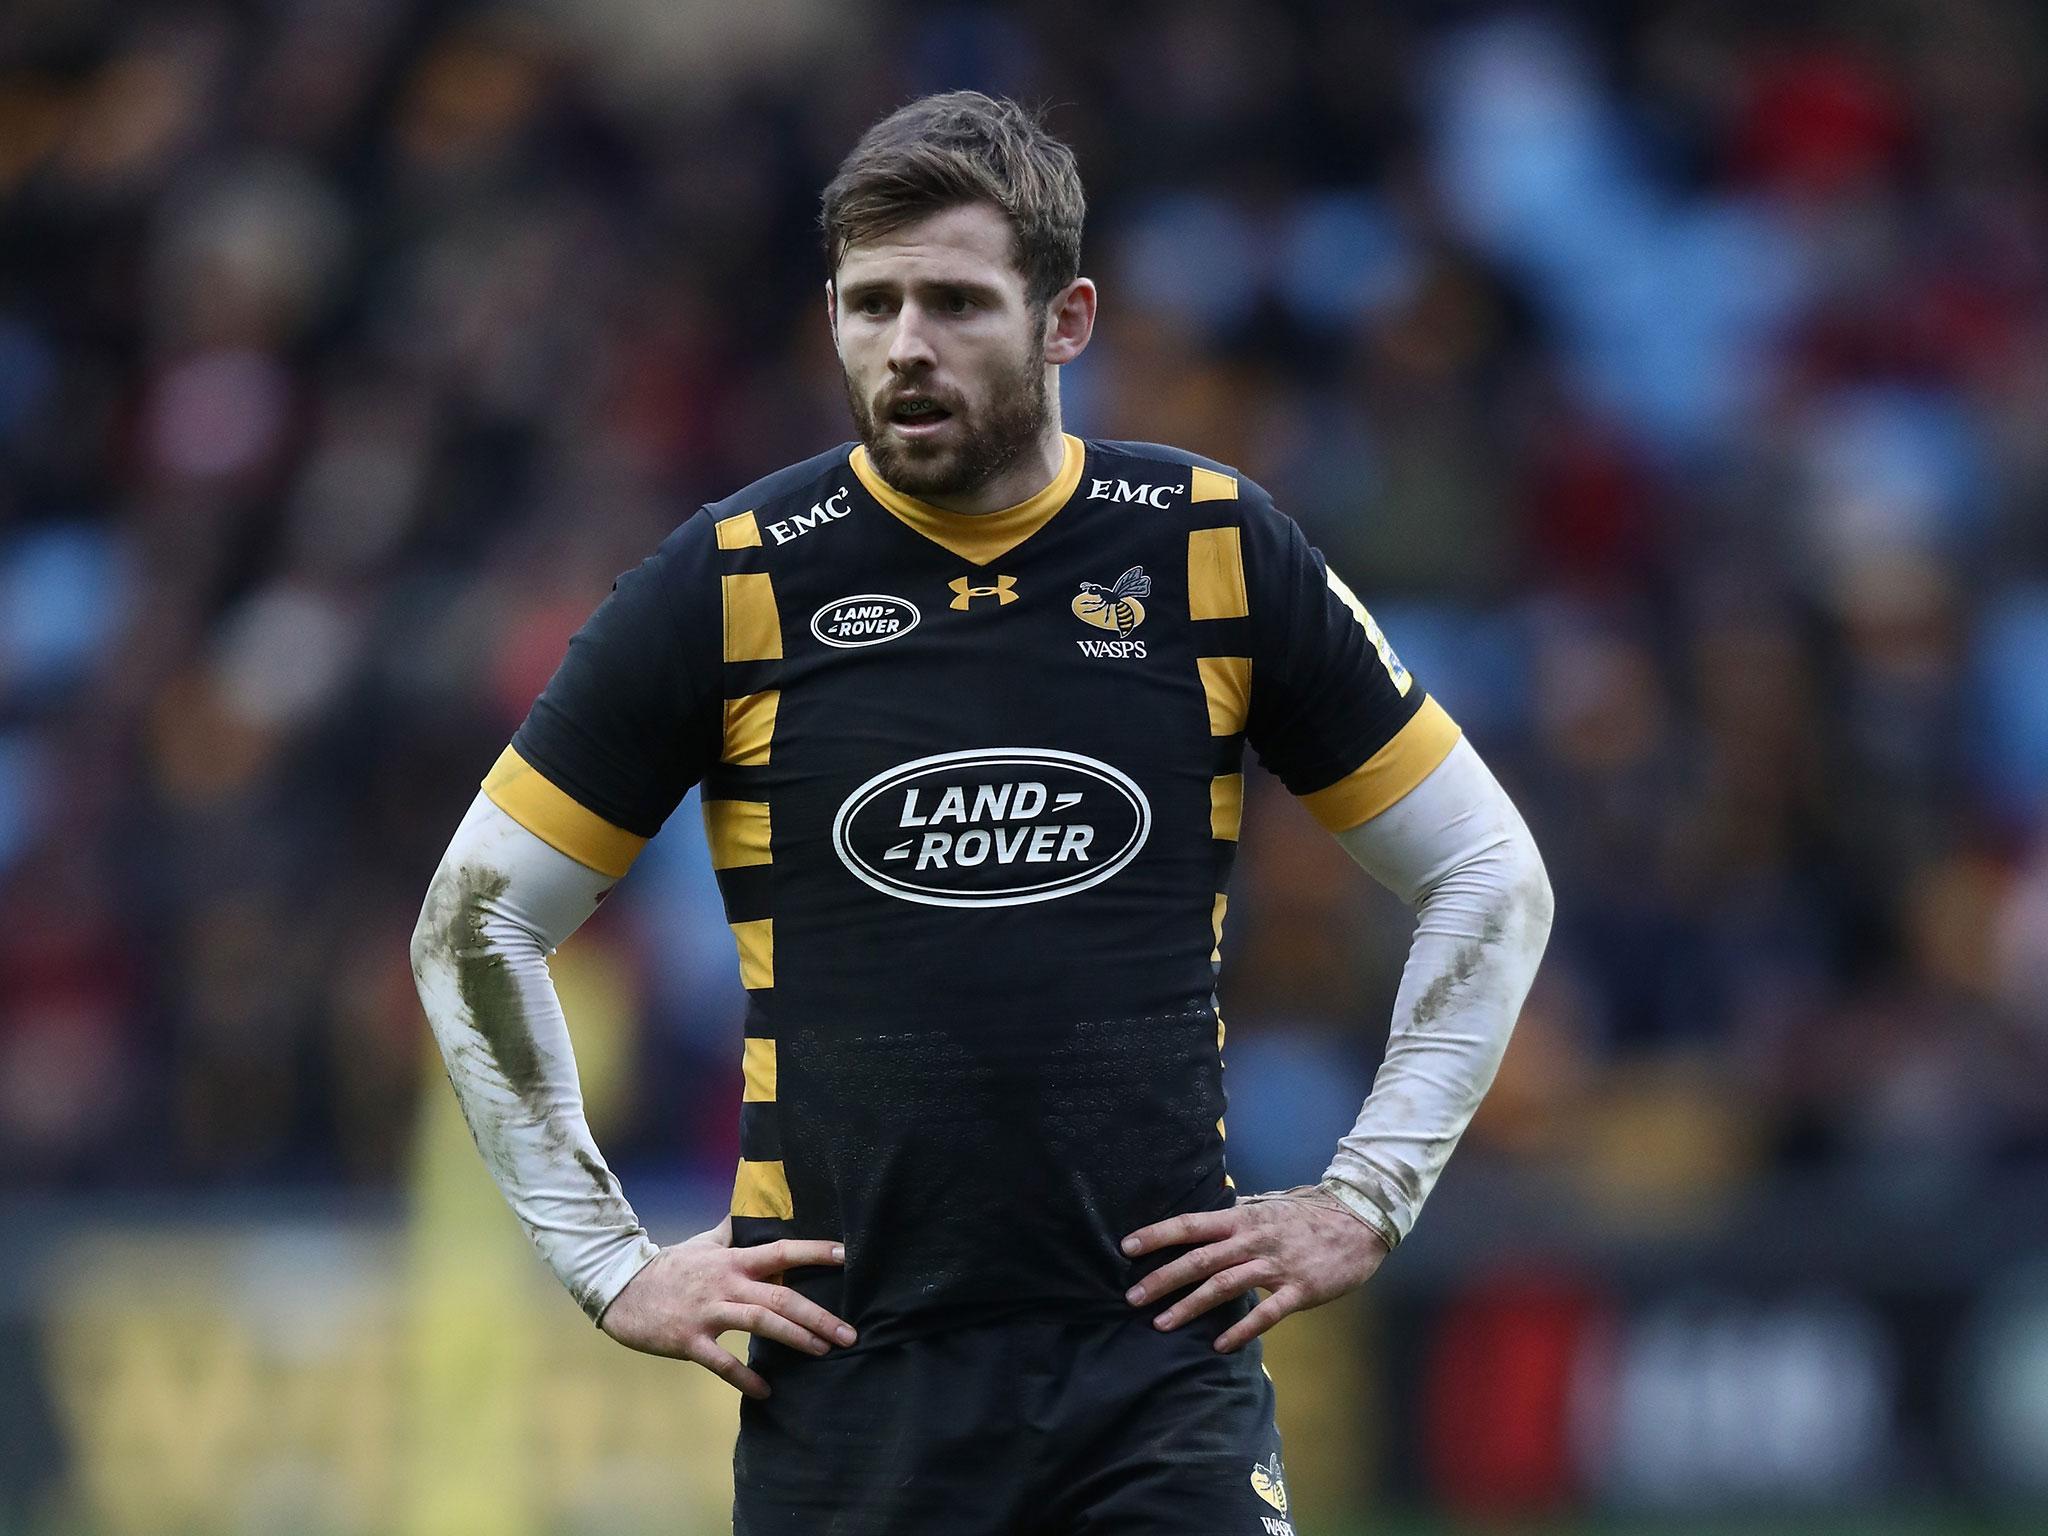 Elliot Daly has been nominated for the RPA players' player of the year awards